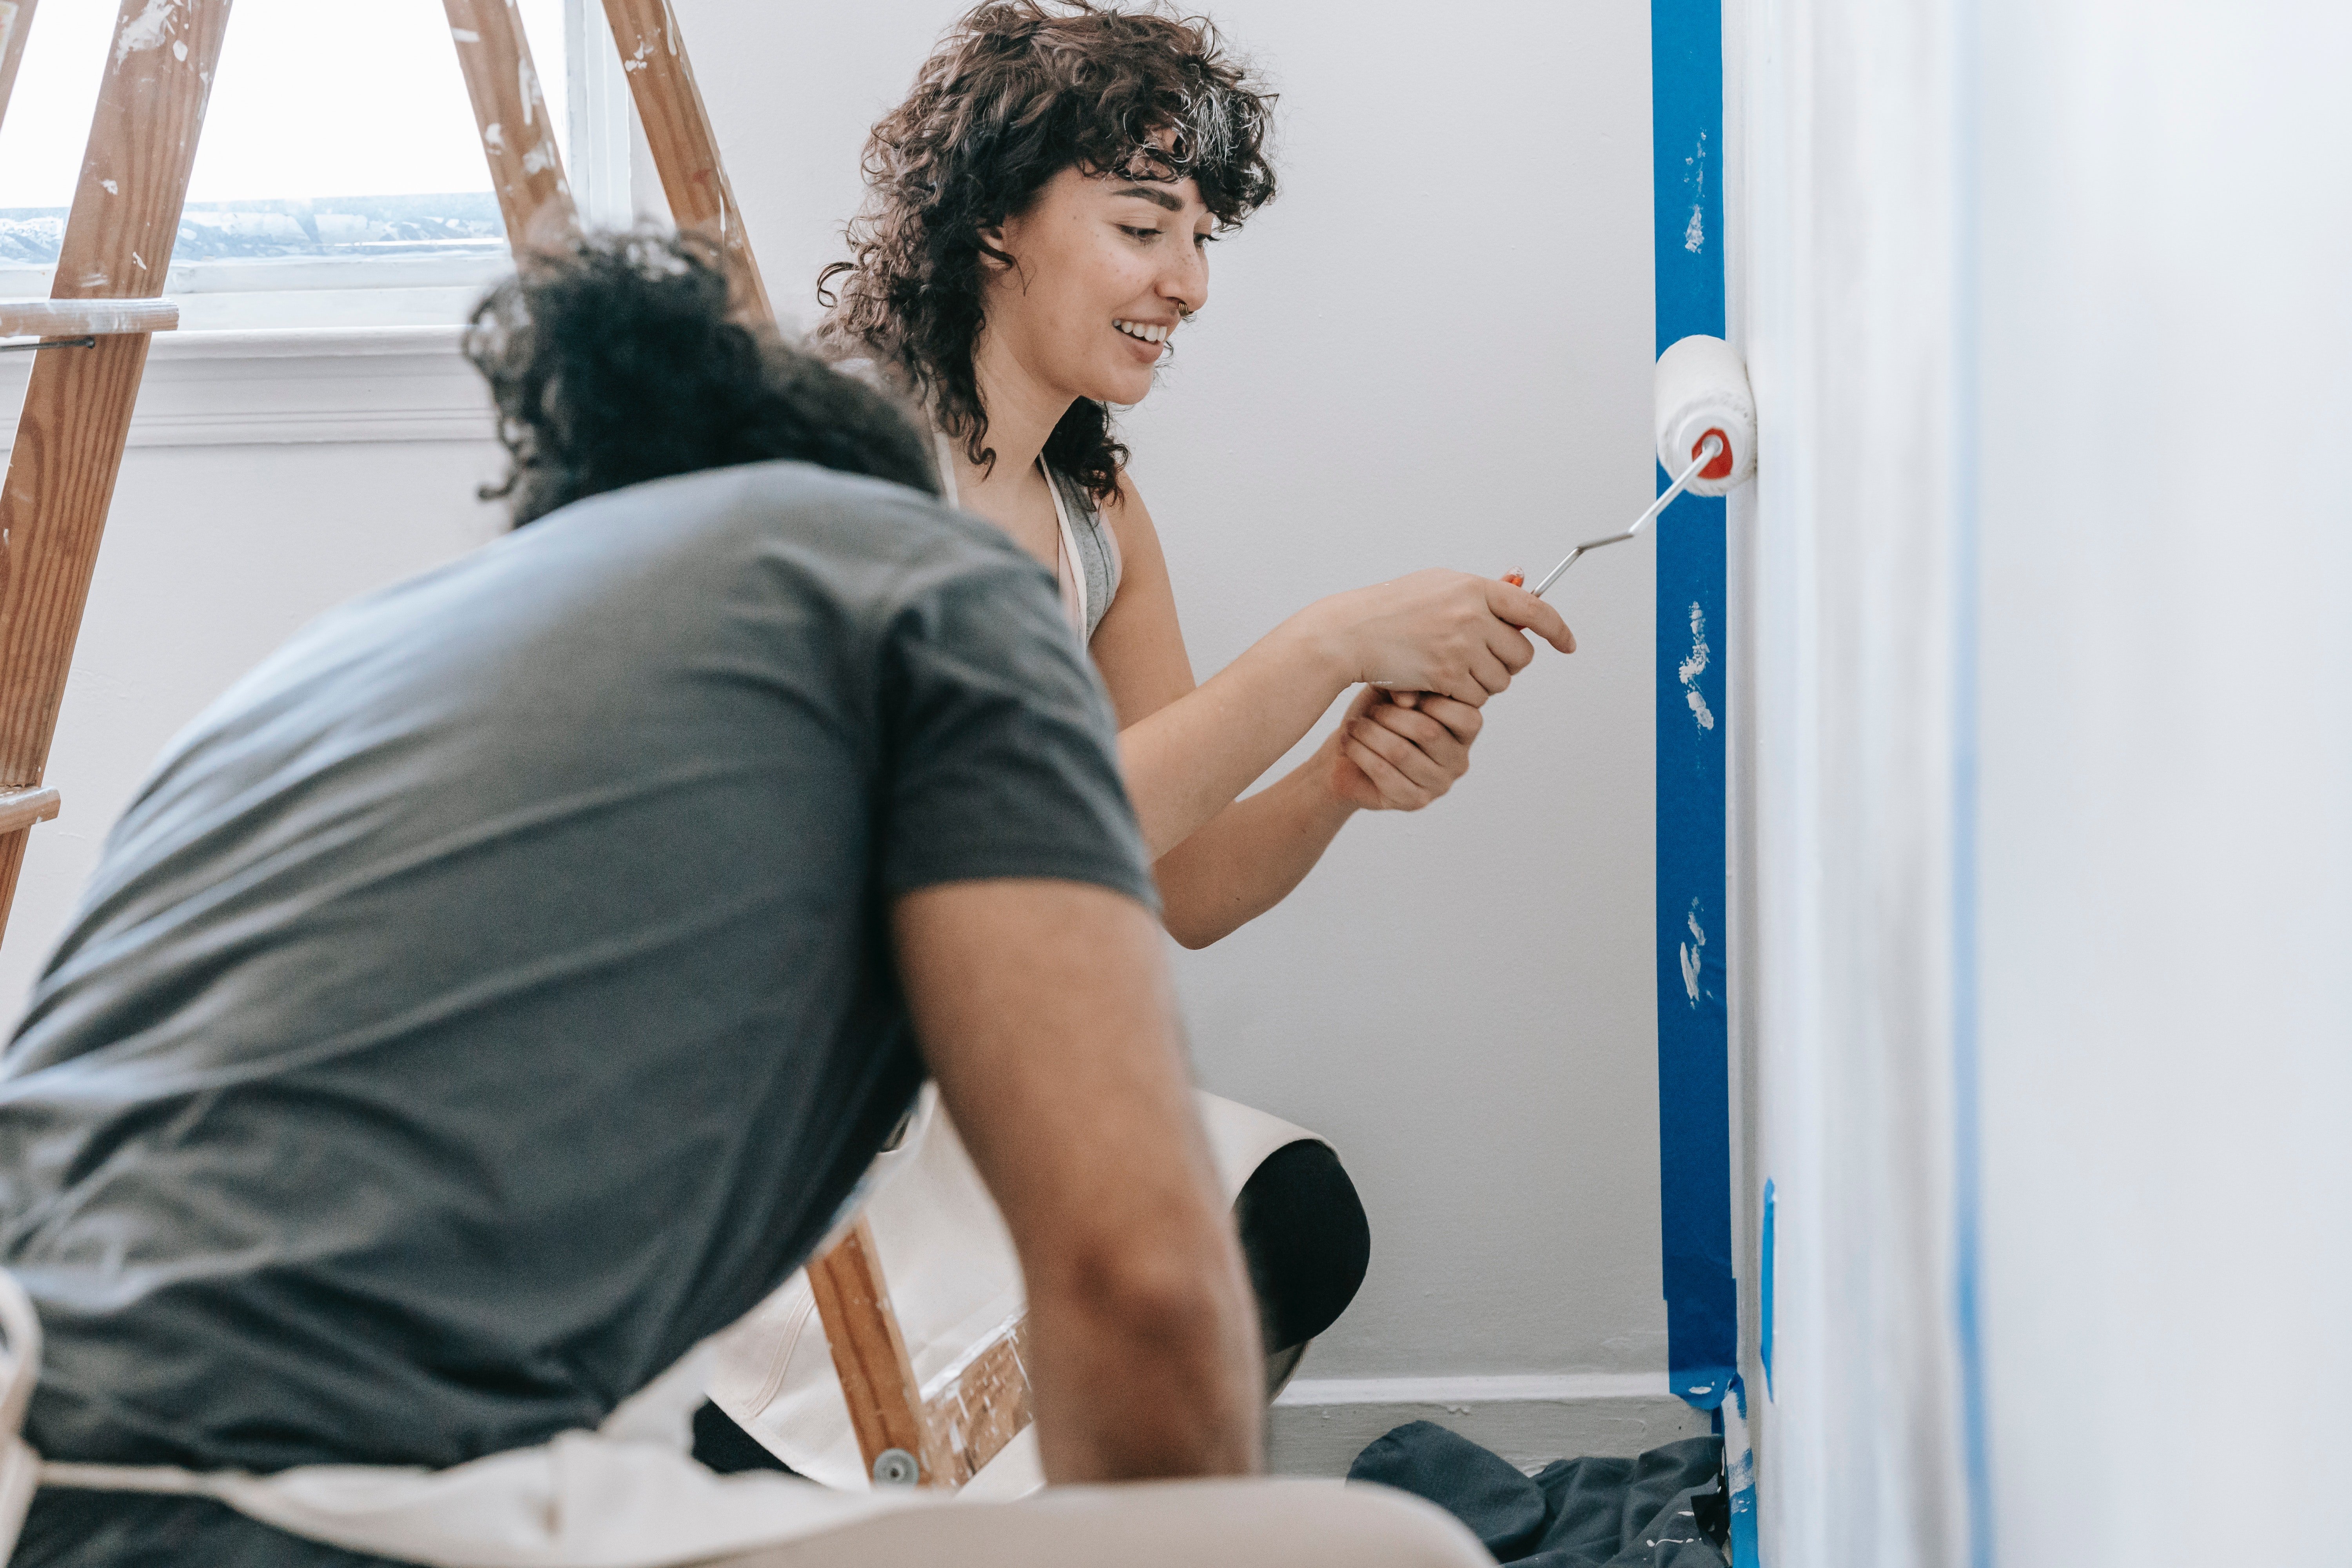 Pictured - A woman painting the wall | Source: Pexels